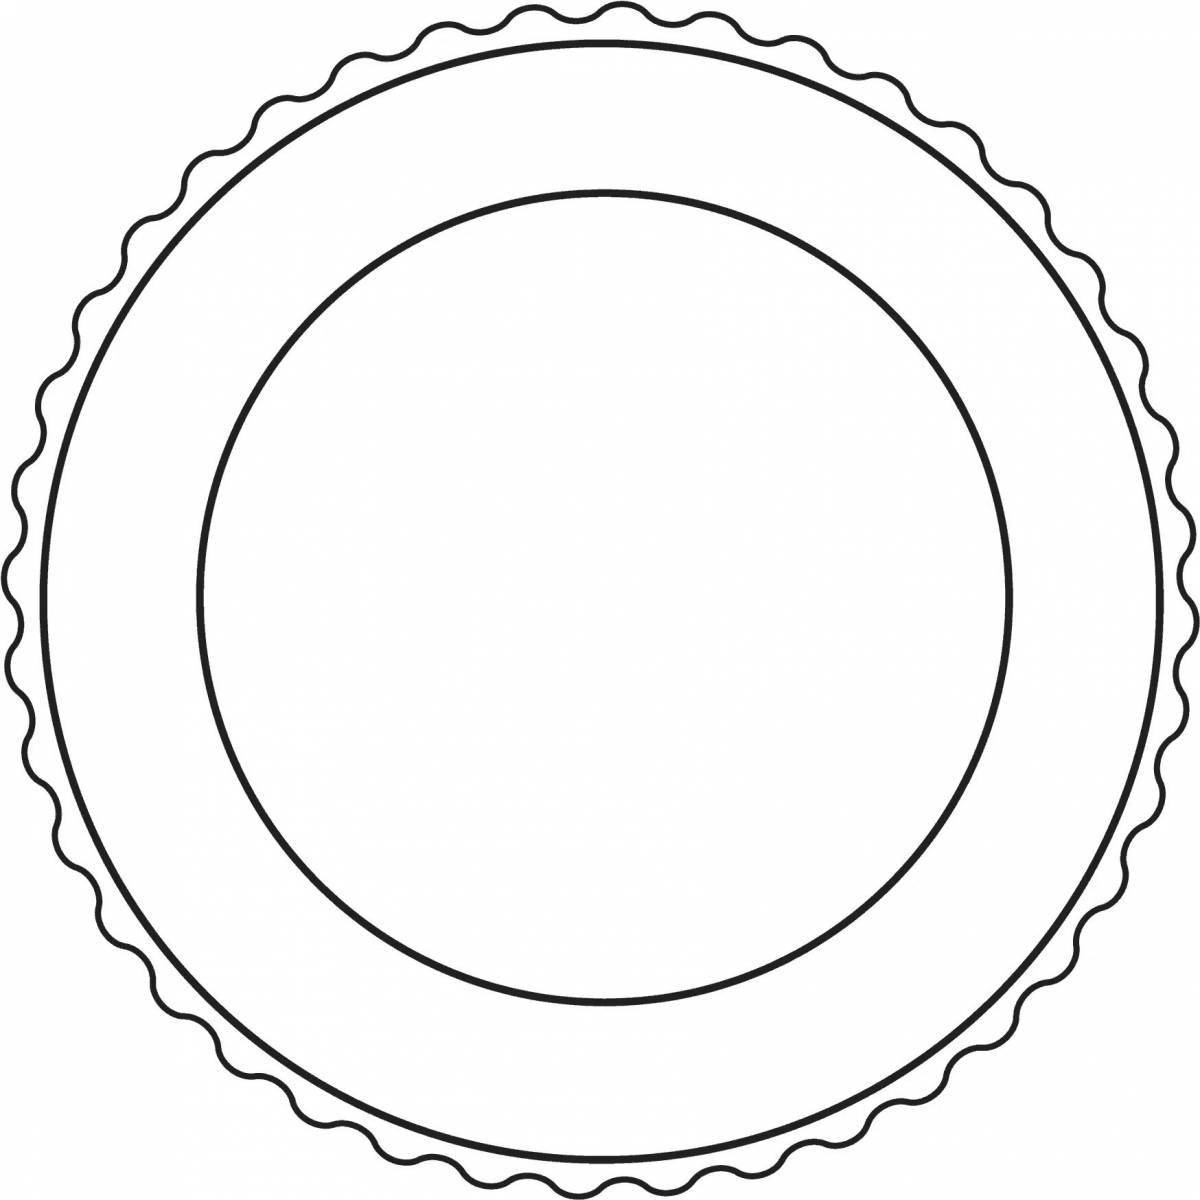 Charming saucer coloring for juniors